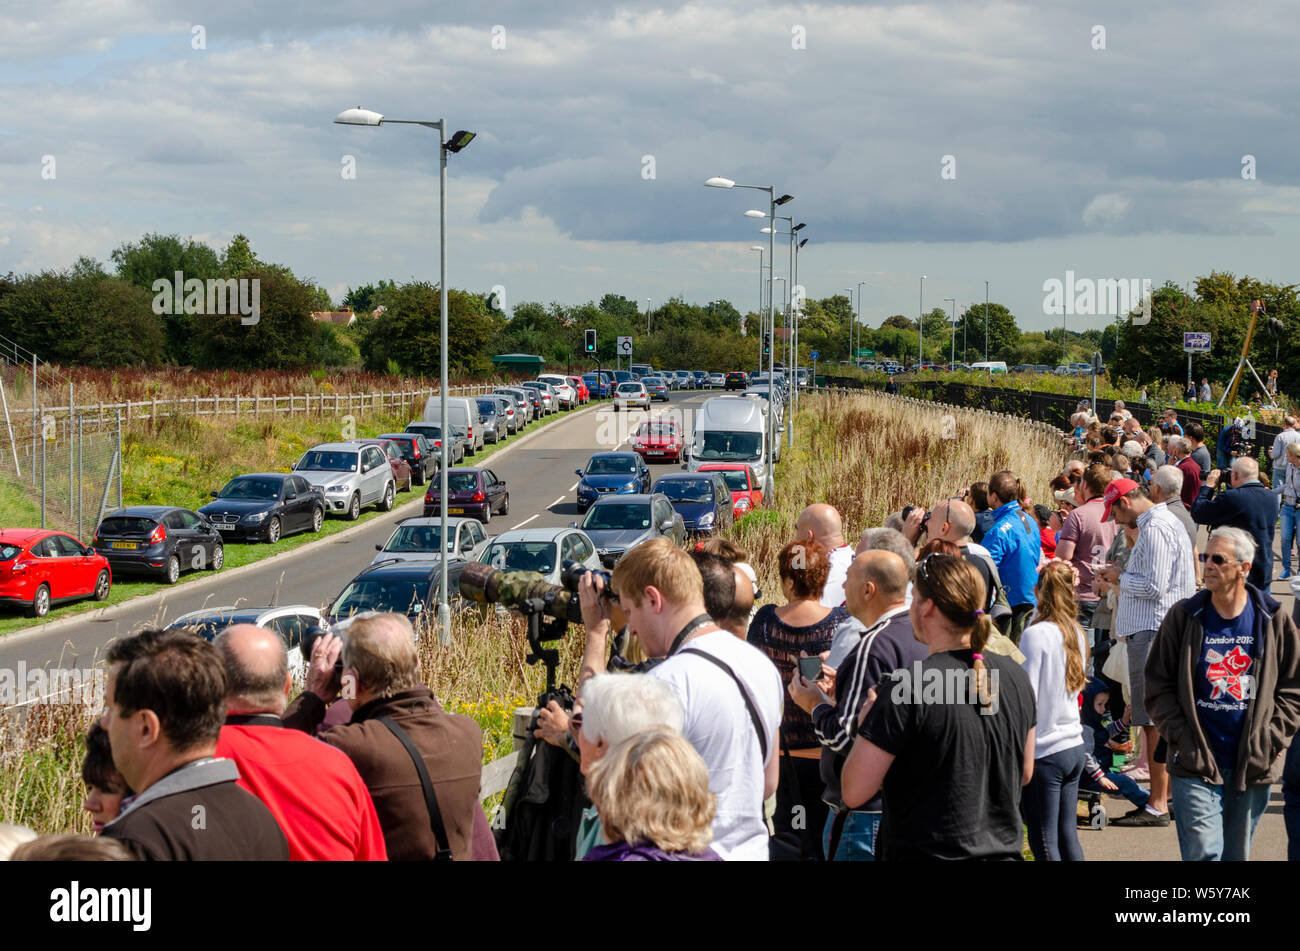 Crowds of people waiting to see the Canadian Warplane Heritage Museum Avro Lancaster FM213, known as the Mynarski Lancaster at London Southend Airport Stock Photo